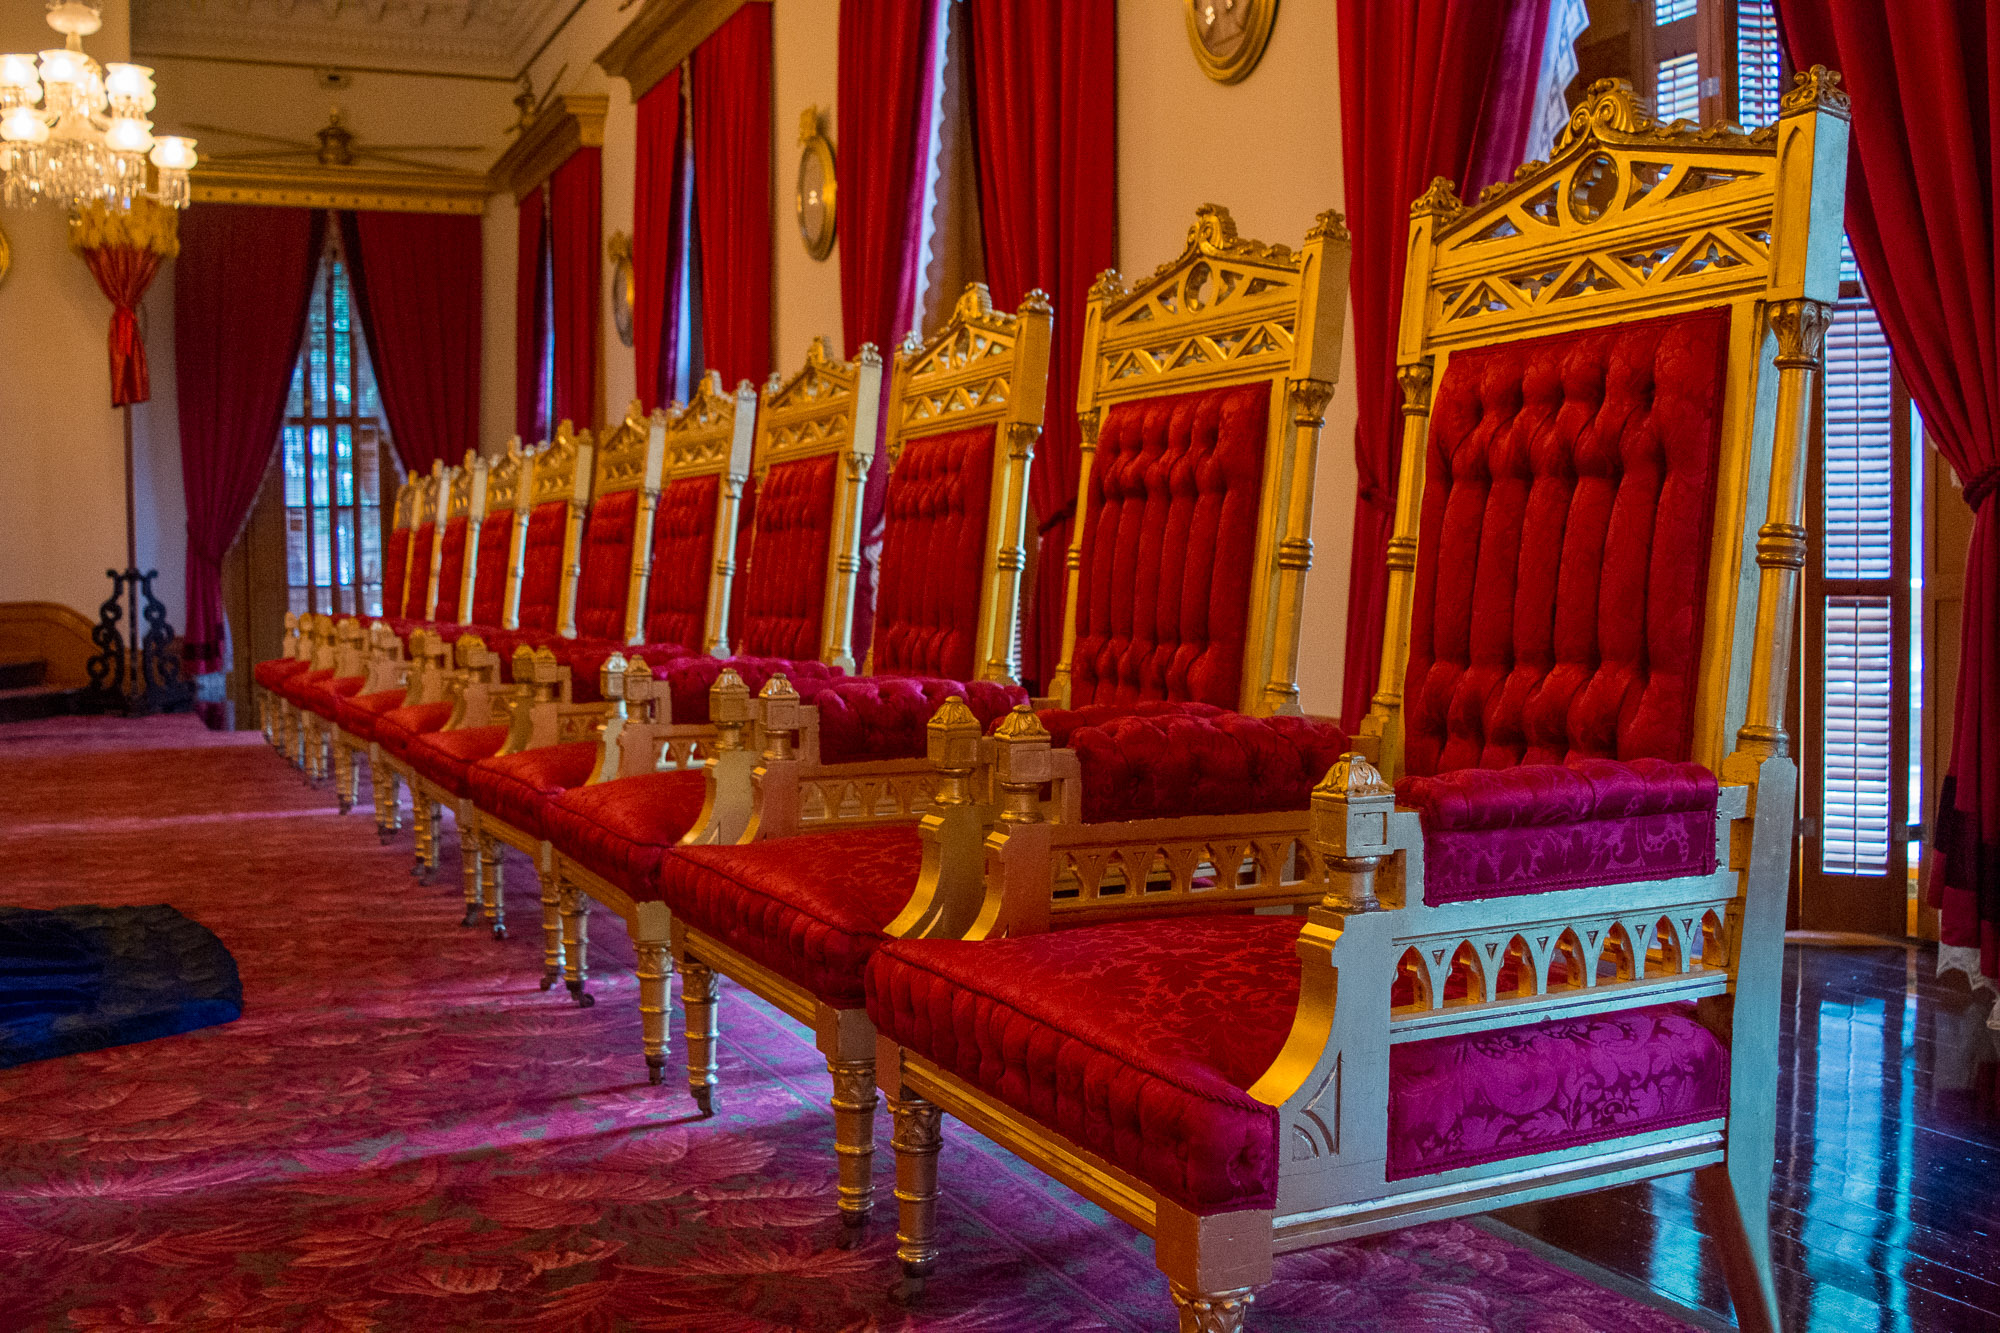 the throne room seating for royal functions - part of my writers inspiration